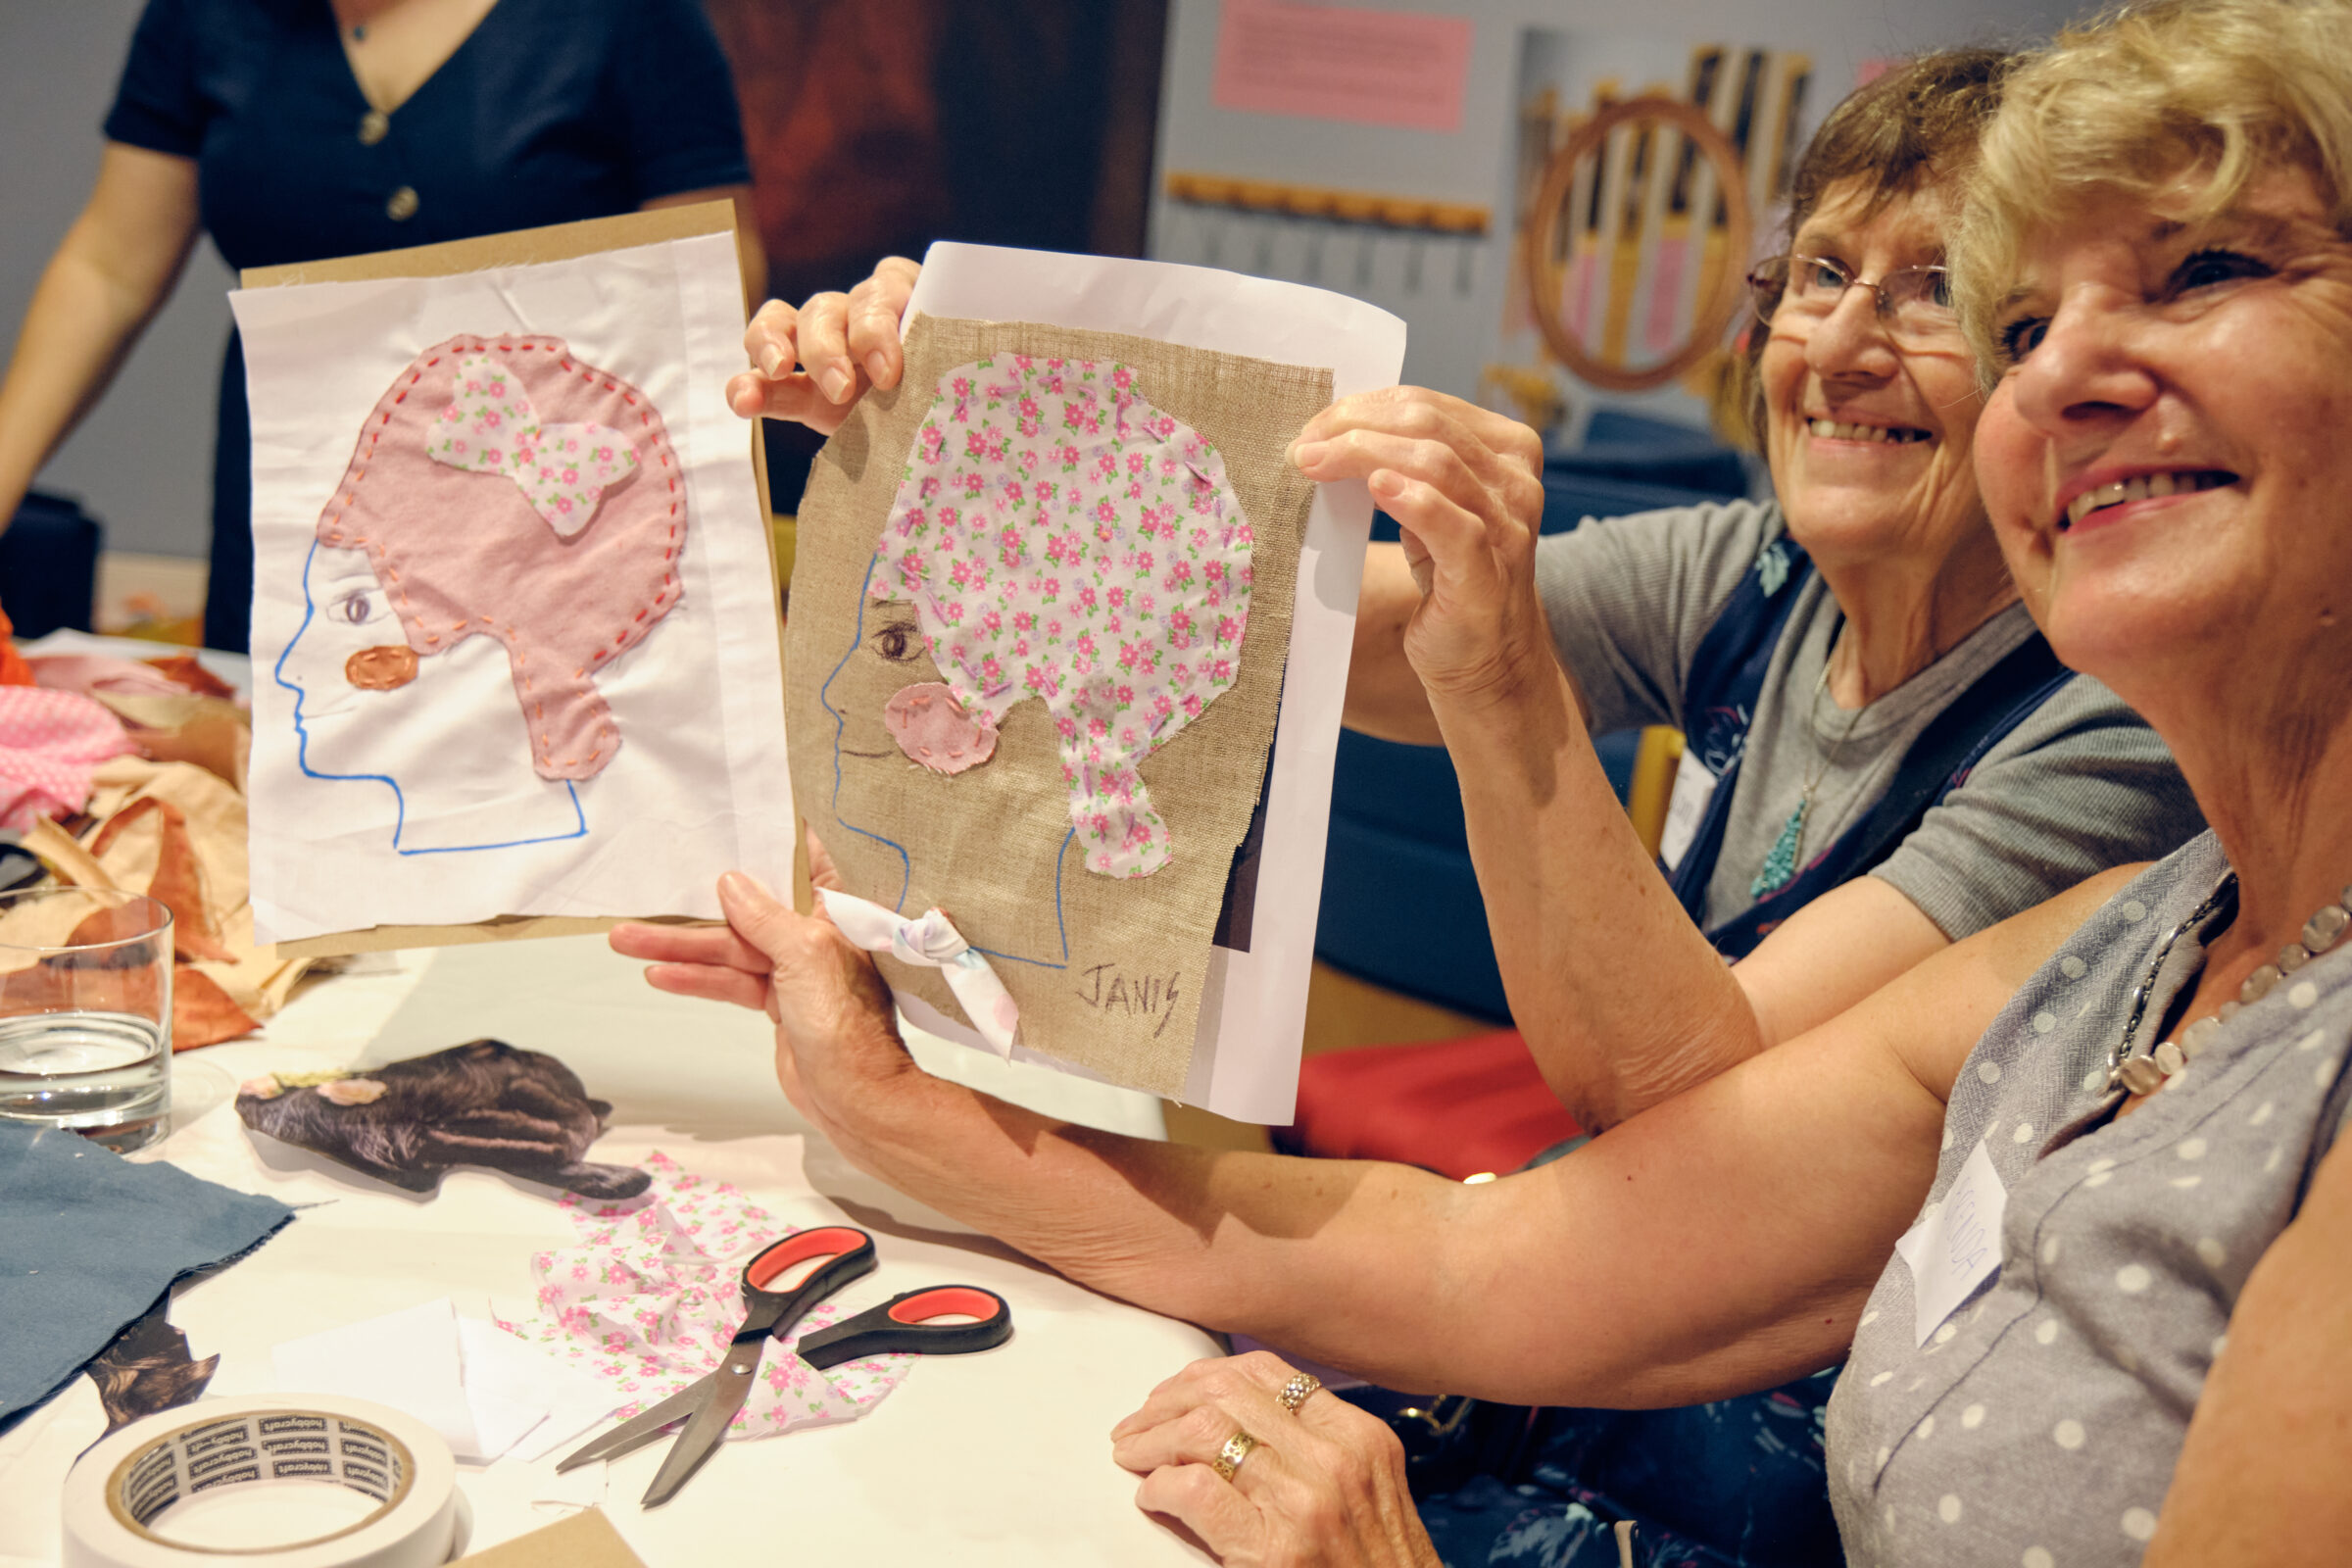 Two older women are sitting next to each other, smiling broadly and holding up pictures of their faces that they have made by sewing different fabric together.